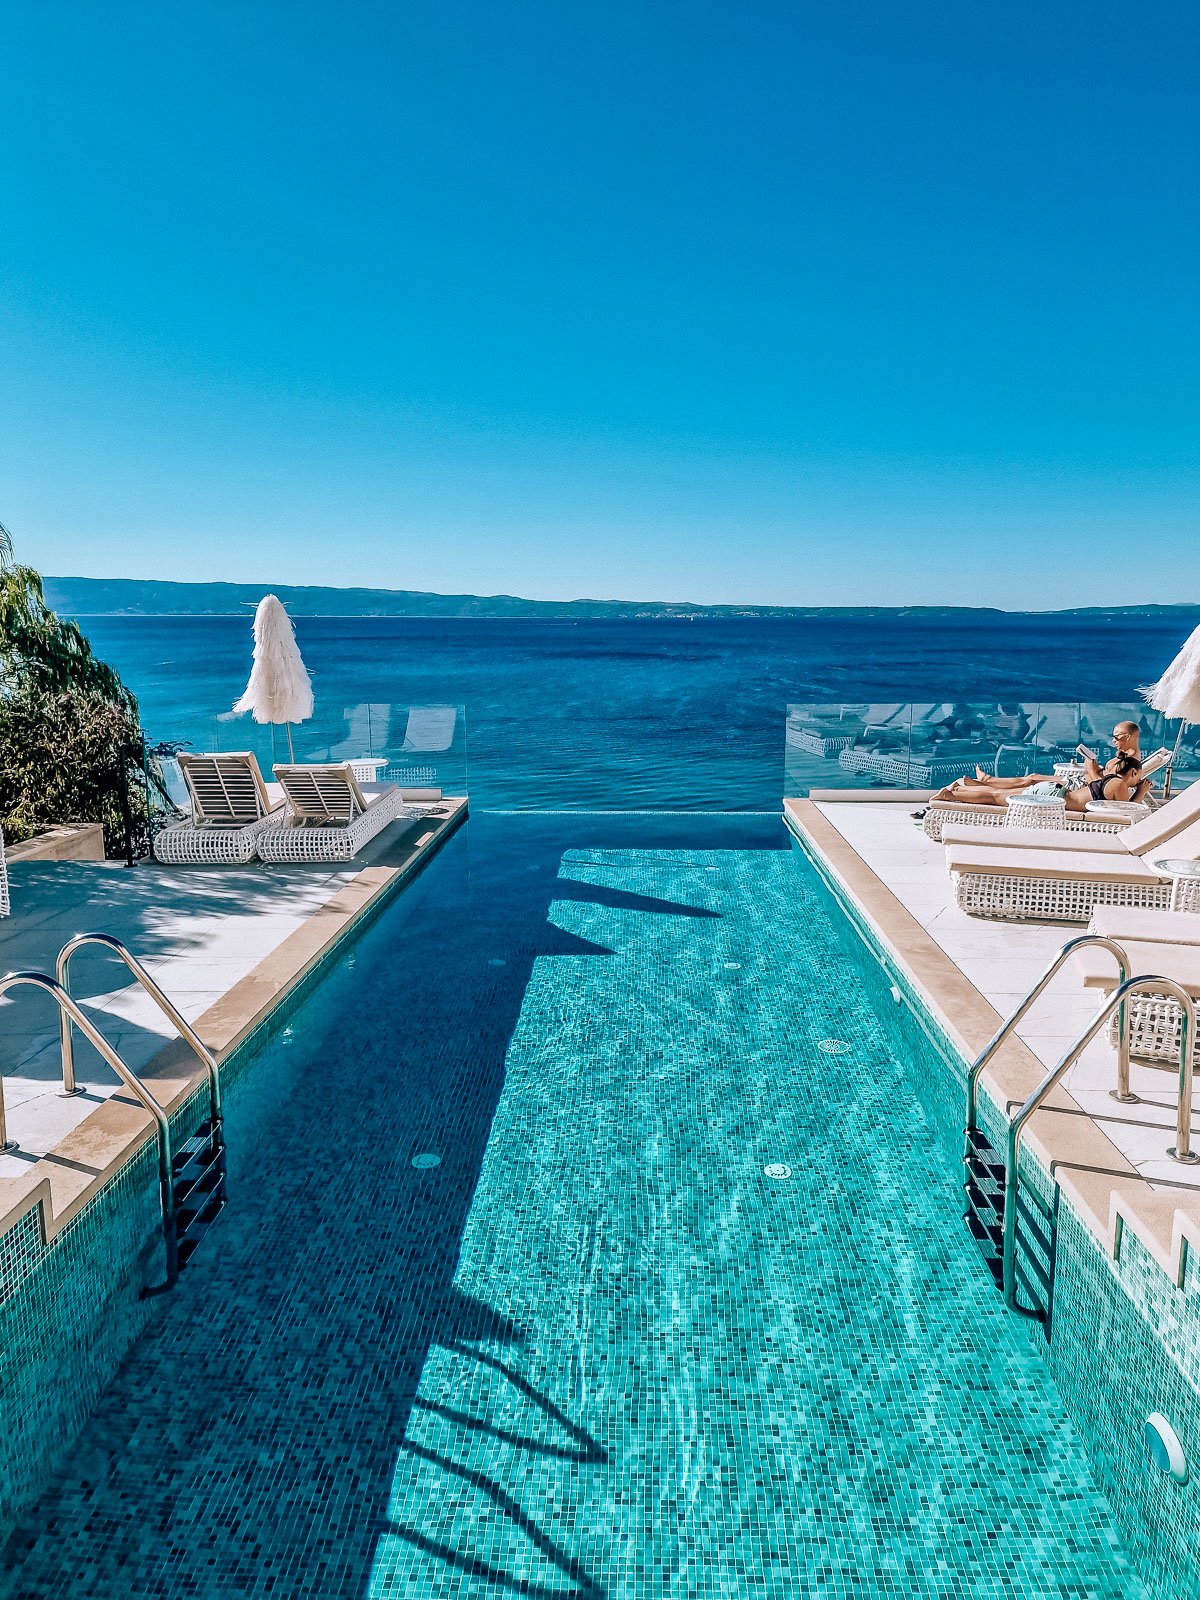 Turquoise infinity pool looking out at blue sea and sky